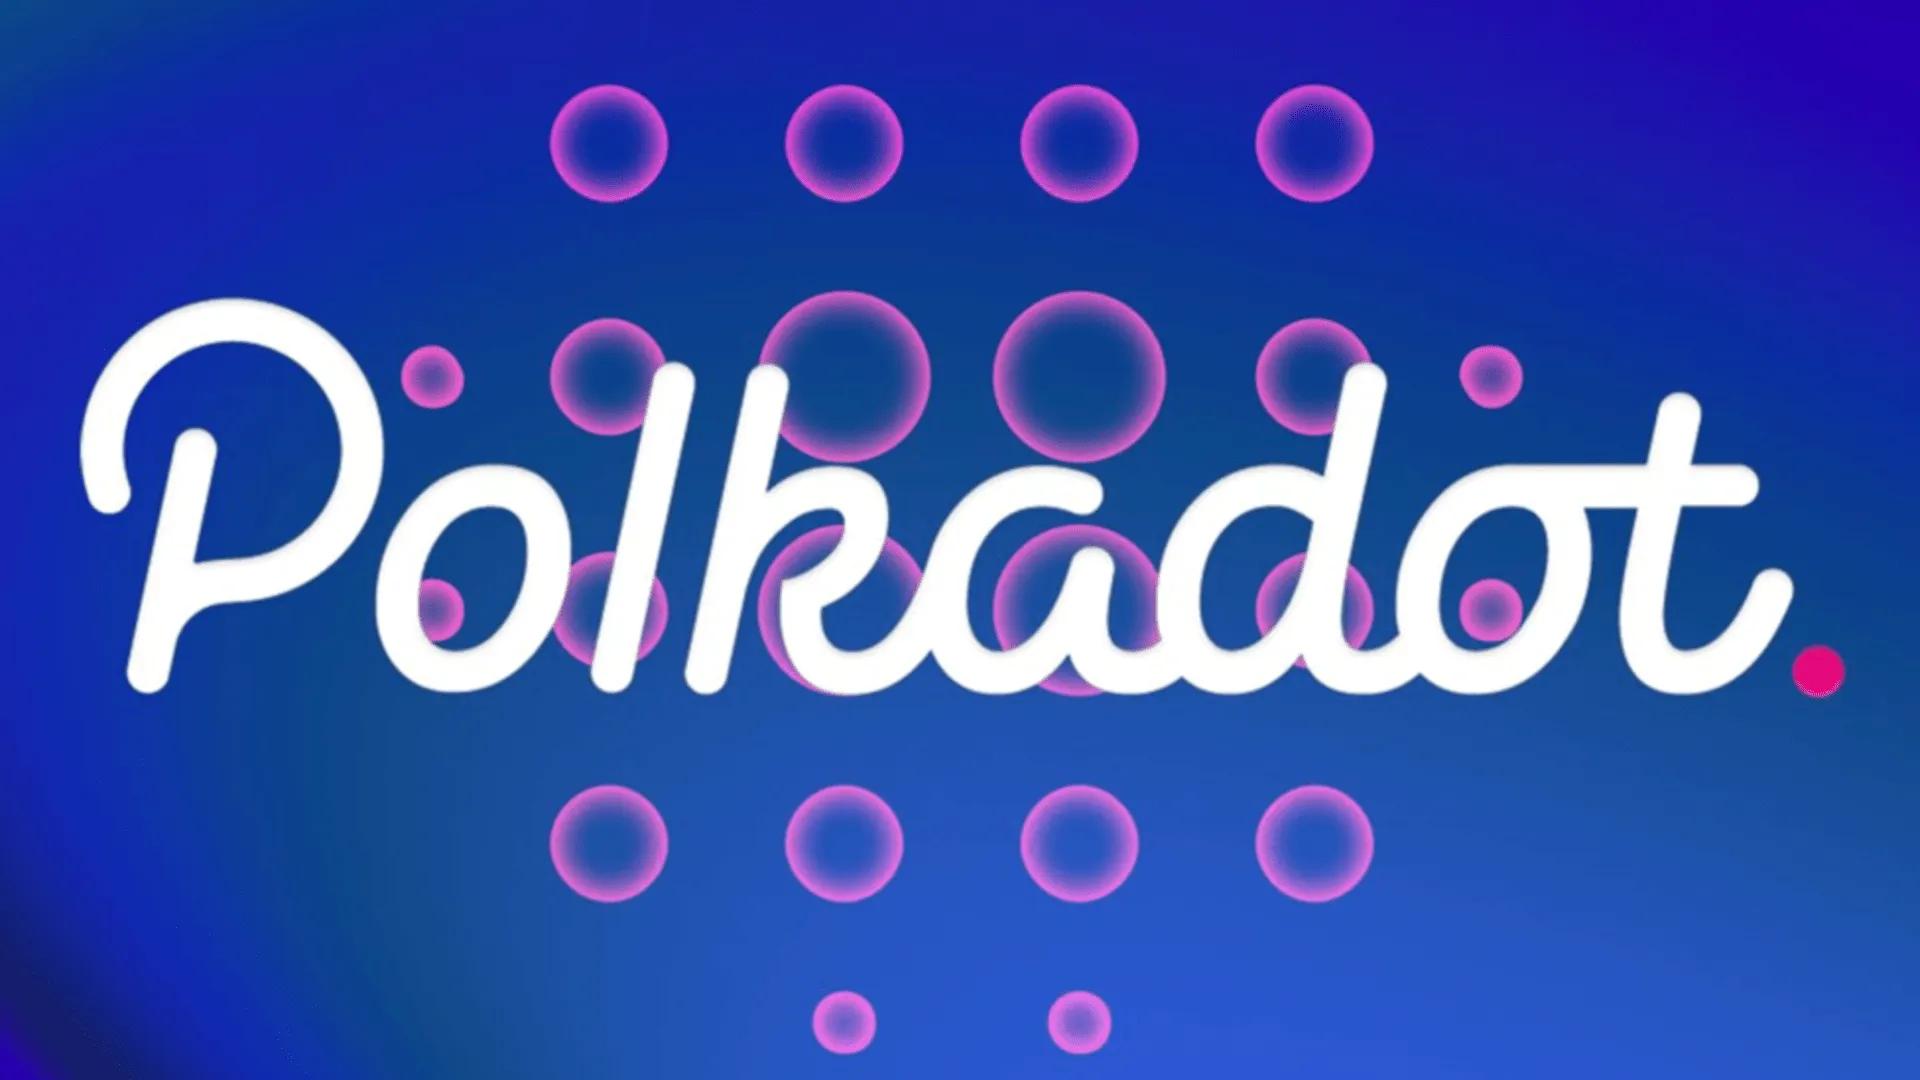 Avalanche & Polkadot Investors Choose PUSHD For E-Commerce Mastery, Seeing 10X Presale Opportunity [Video]